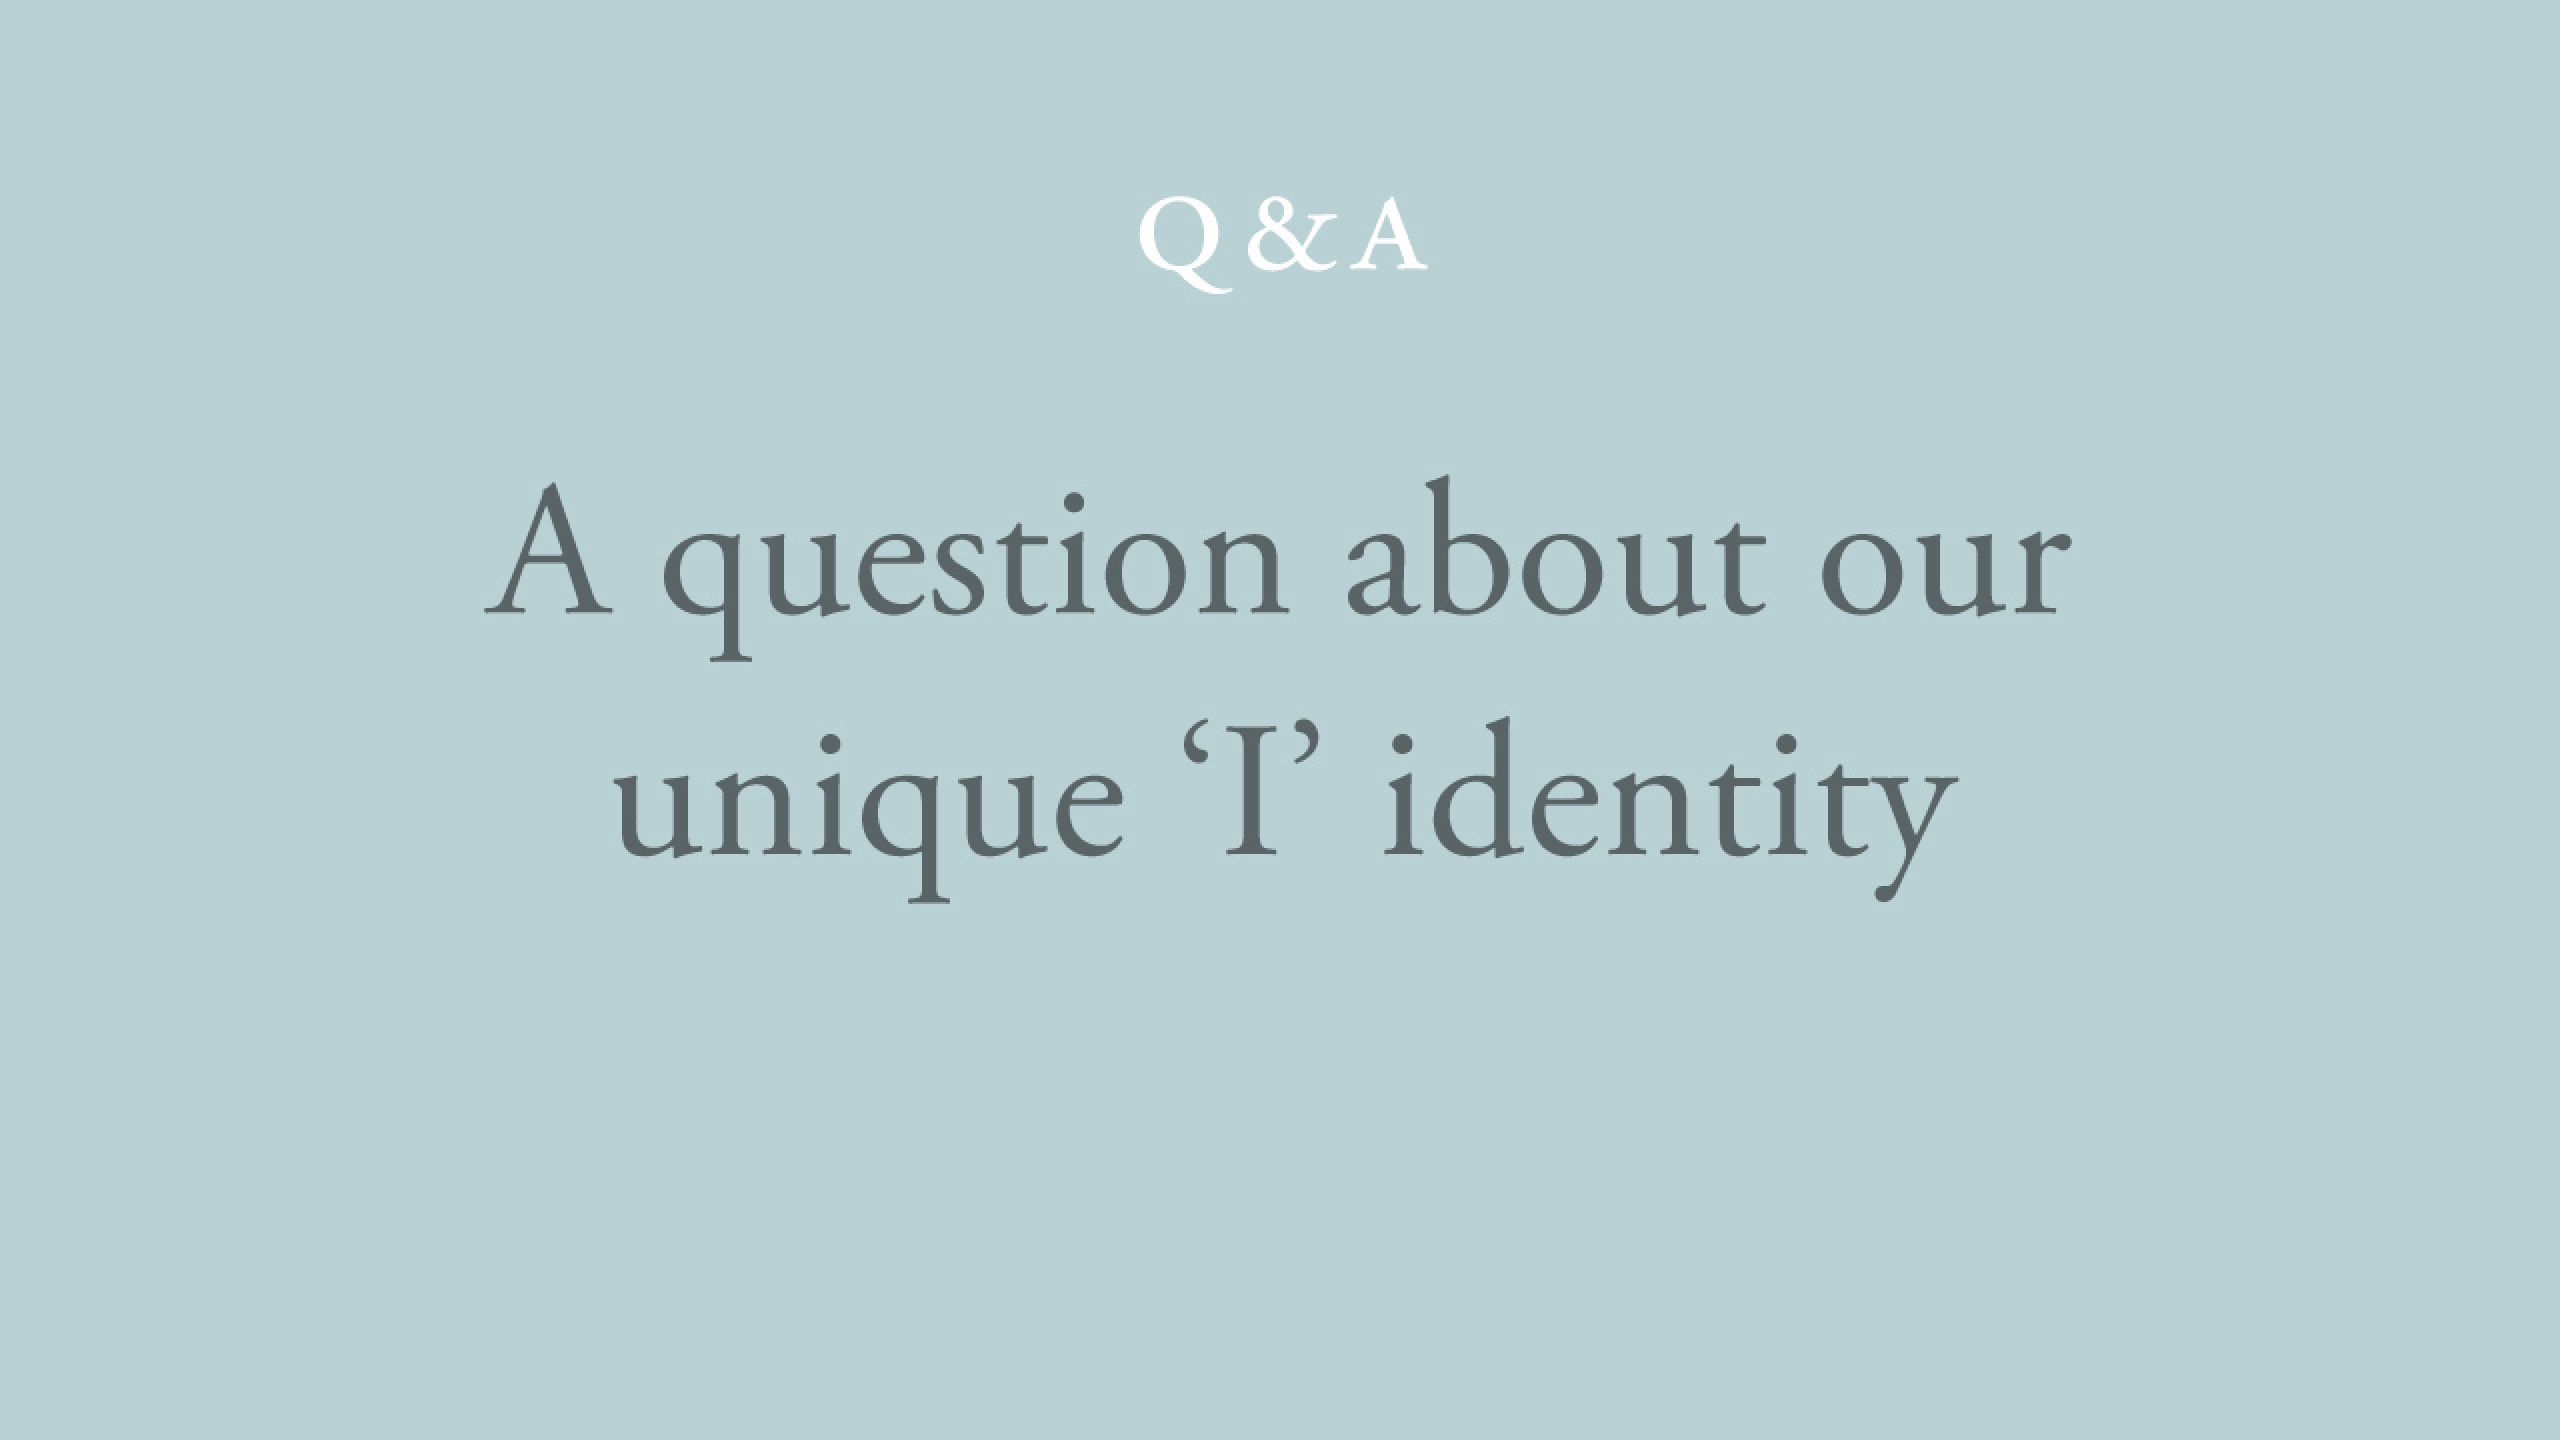 What forms our unique 'I' identity? 